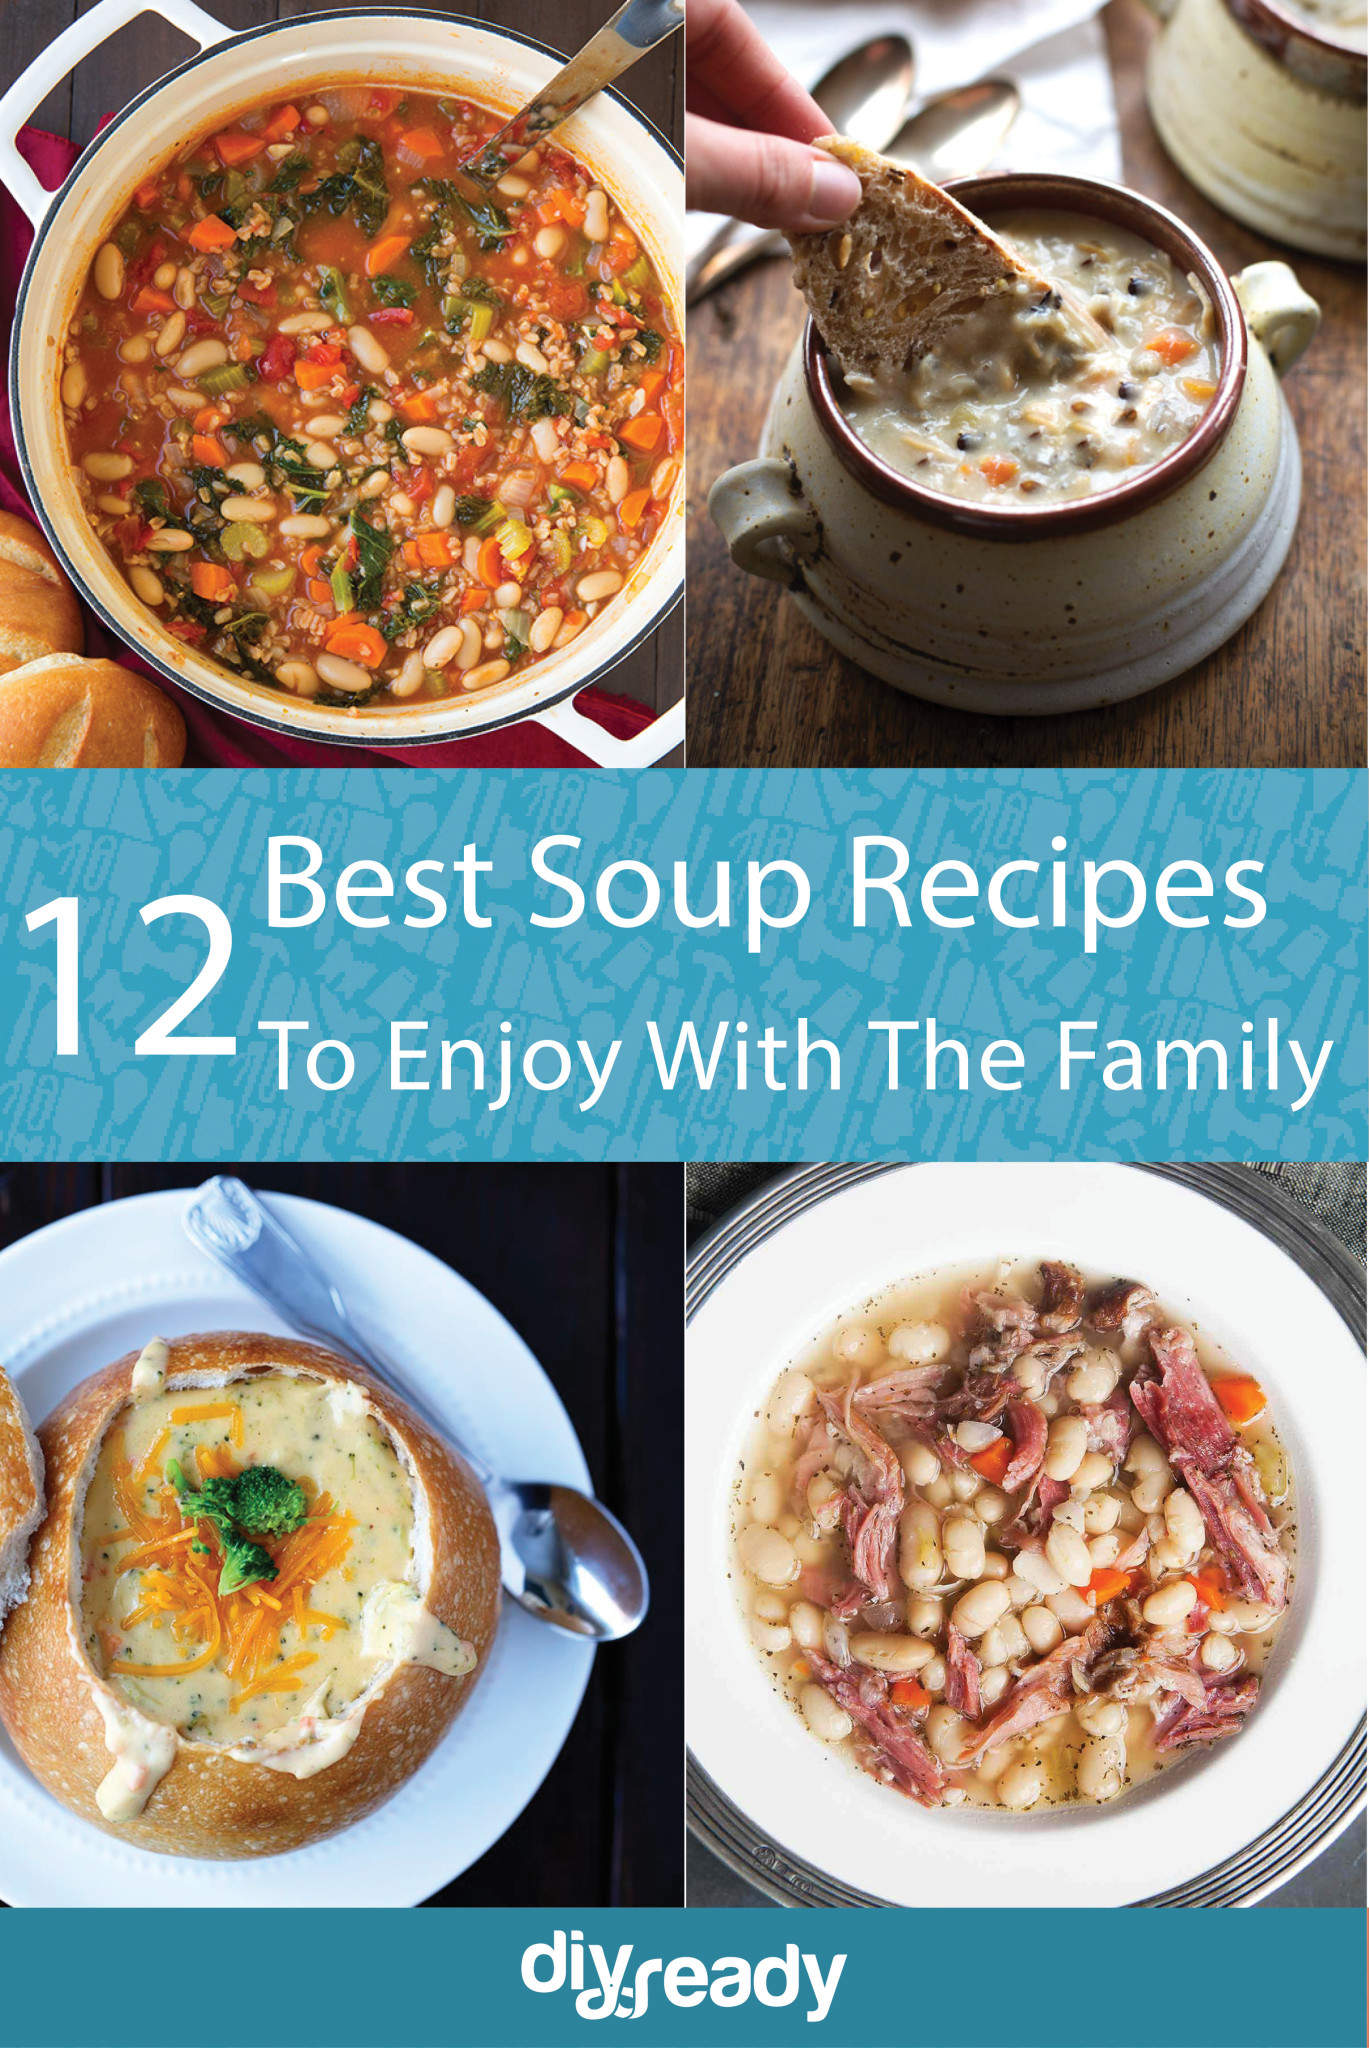 The 12 Best Soup Recipes to Enjoy With the Whole Family | https://diyprojects.com/12-best-soup-recipes/